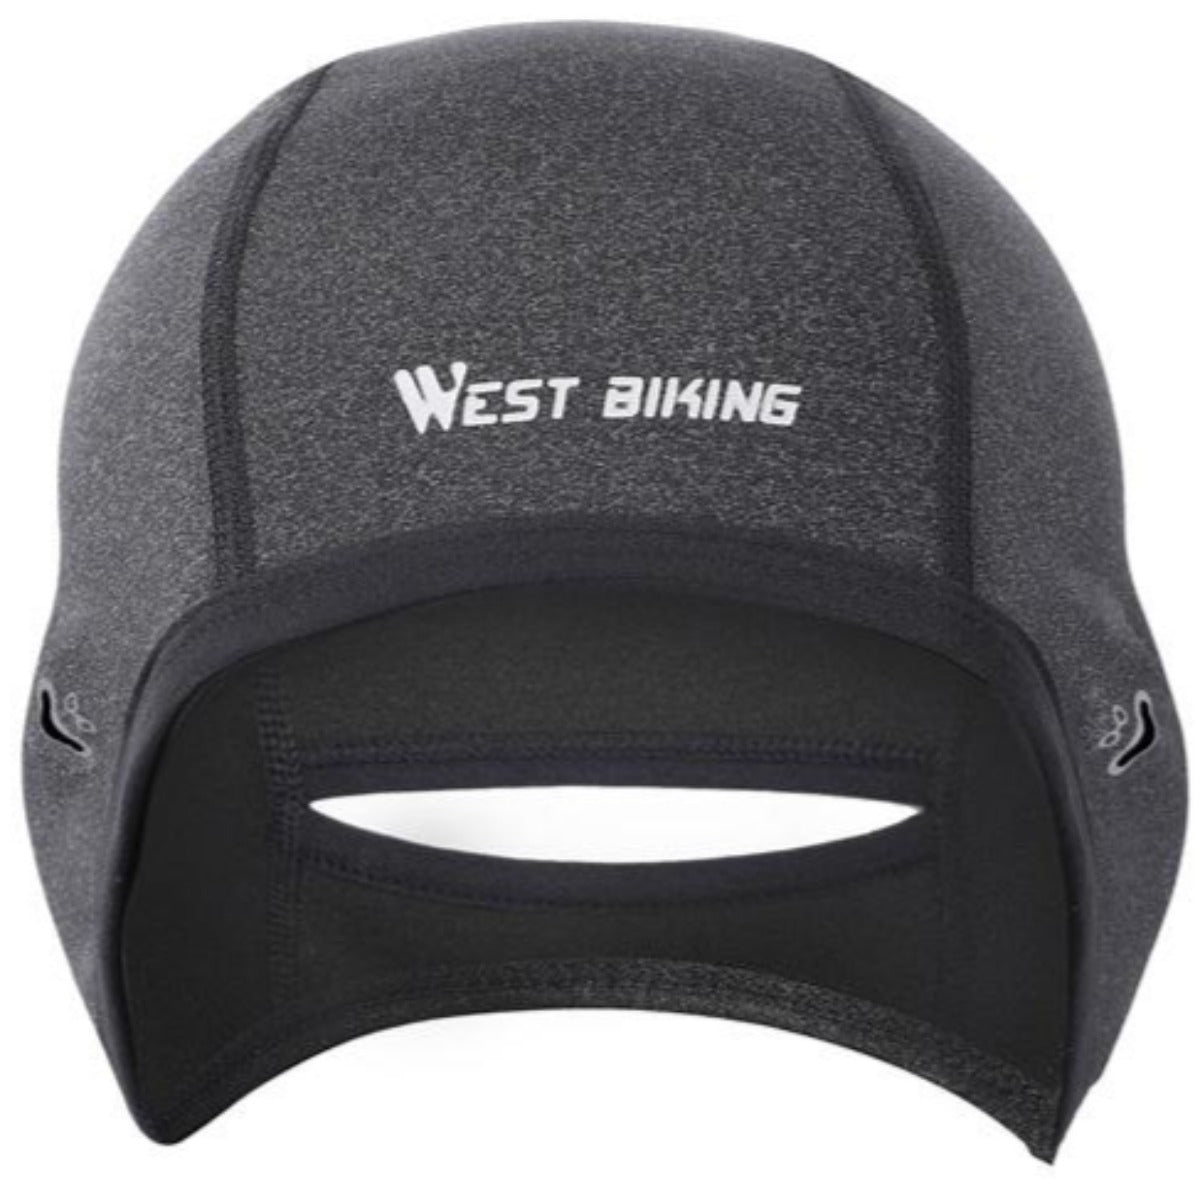 The Motorcycle Helmet Liner Cap, designed for cooling sweat and wicking, is shown on a white background.